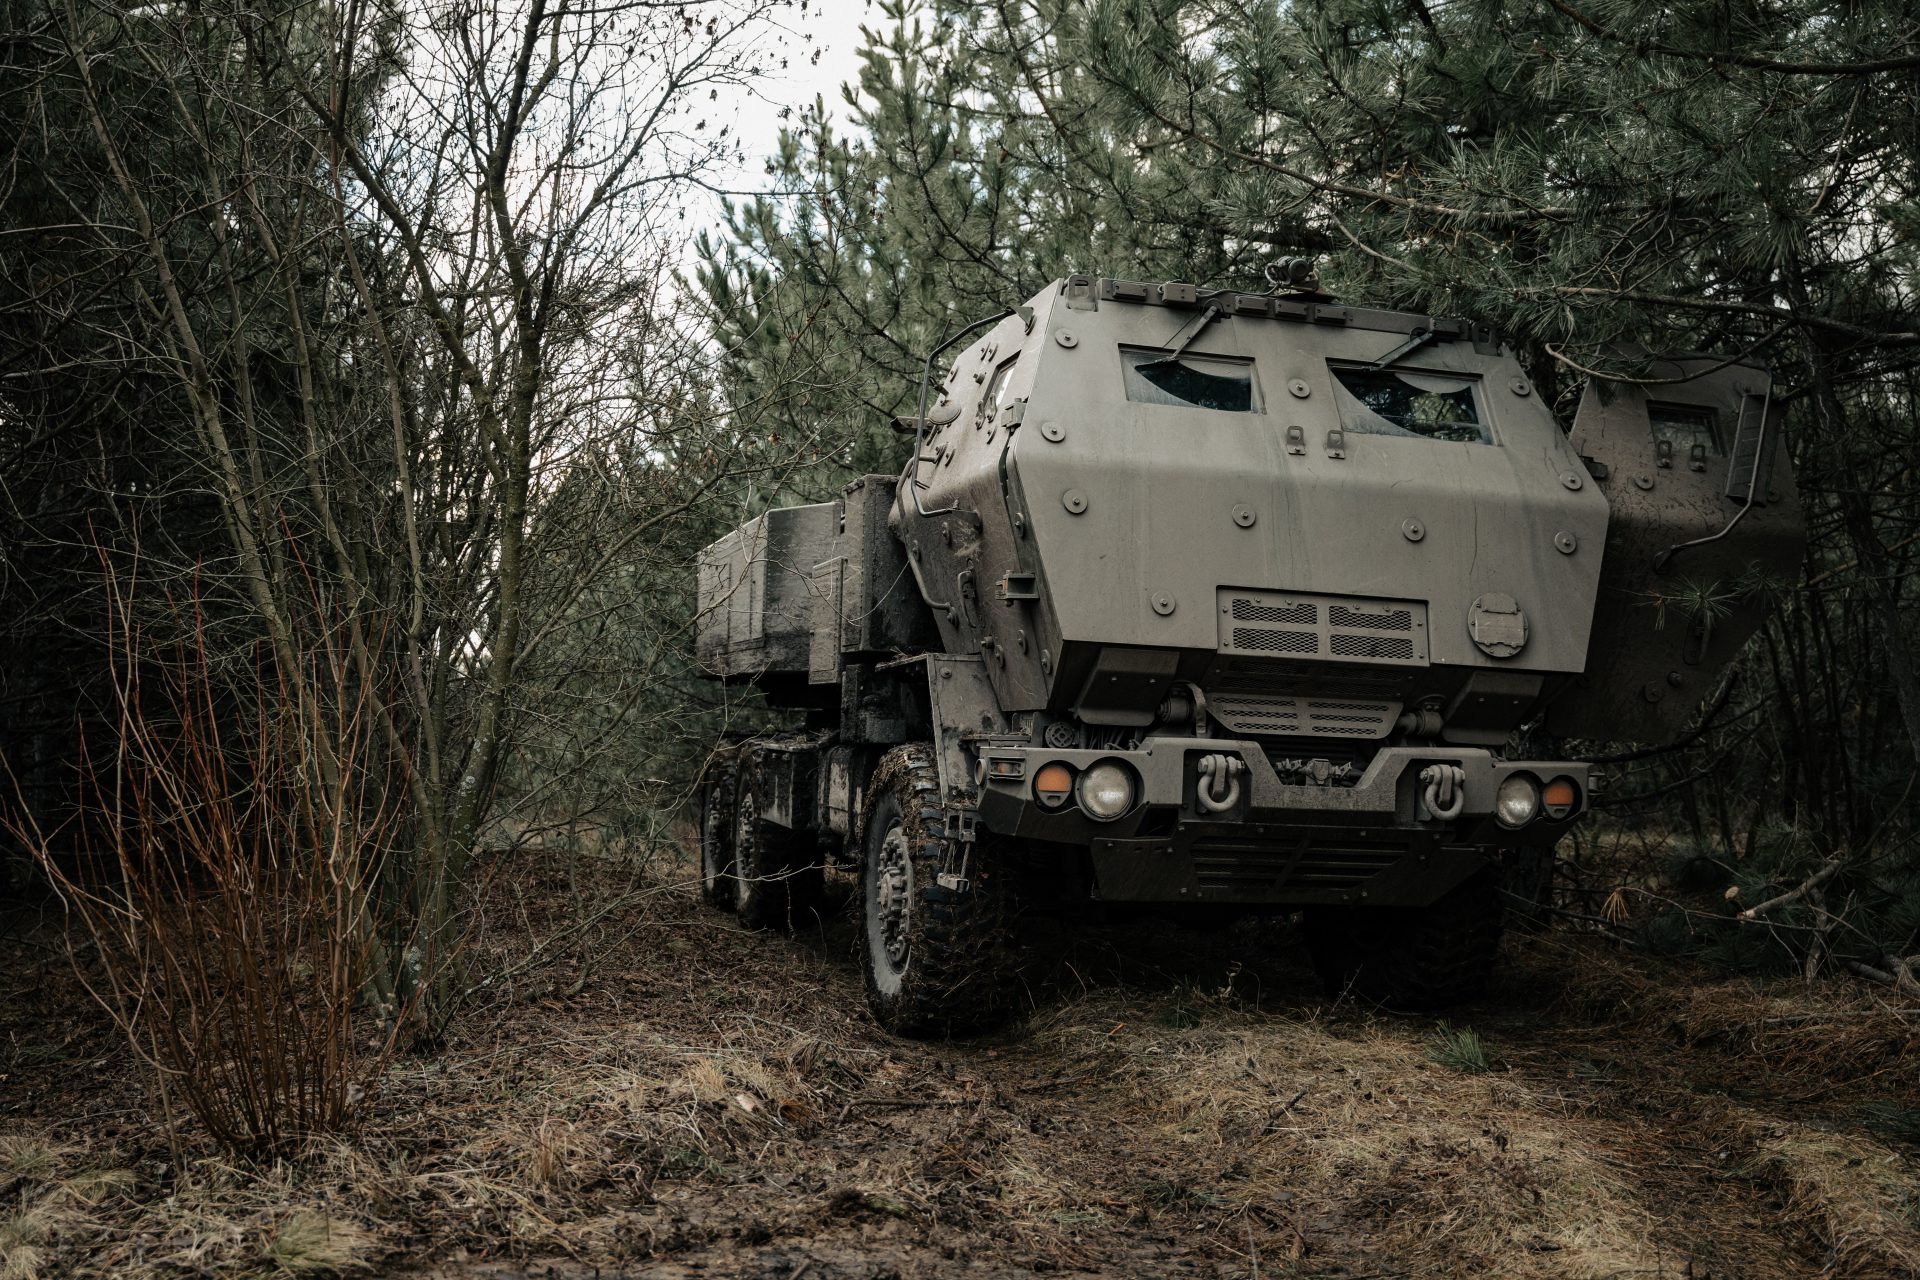 What we know about Himars